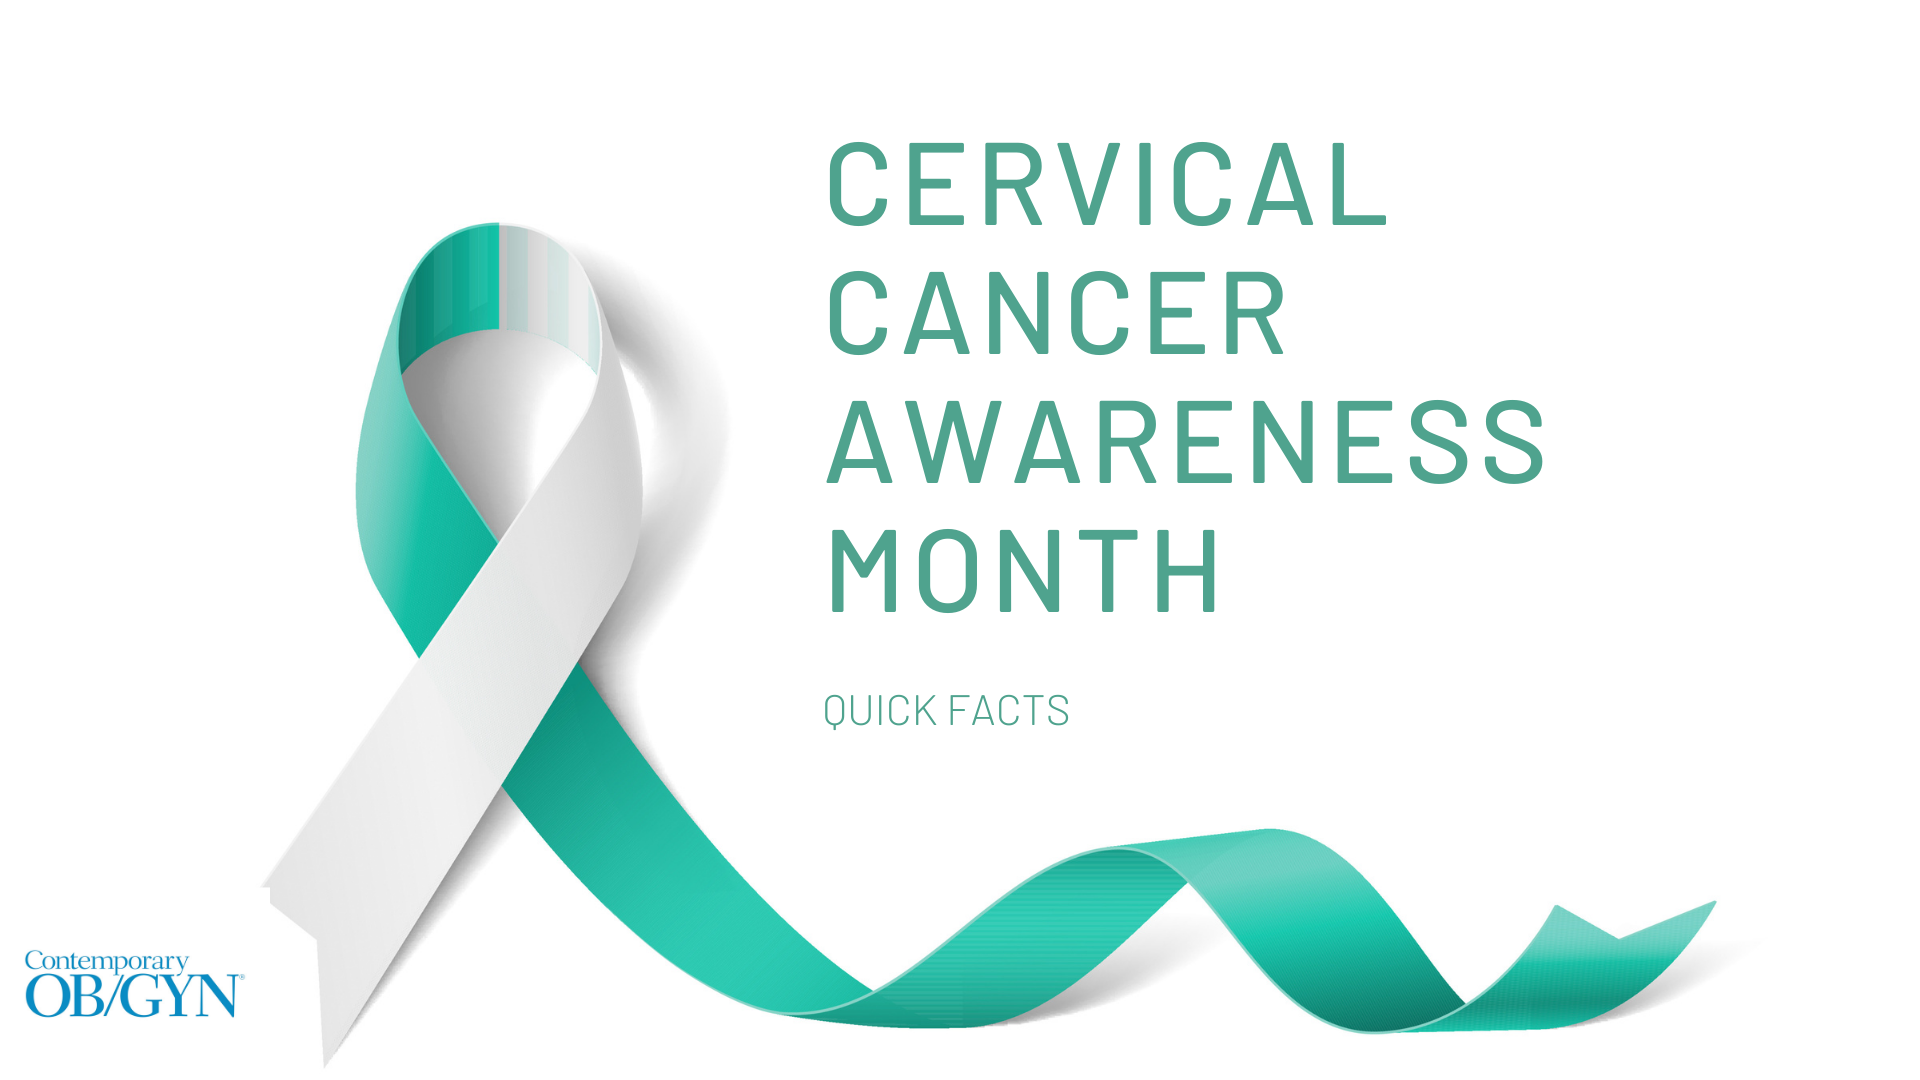 Cervical Cancer Awareness: Facts, statistics and more